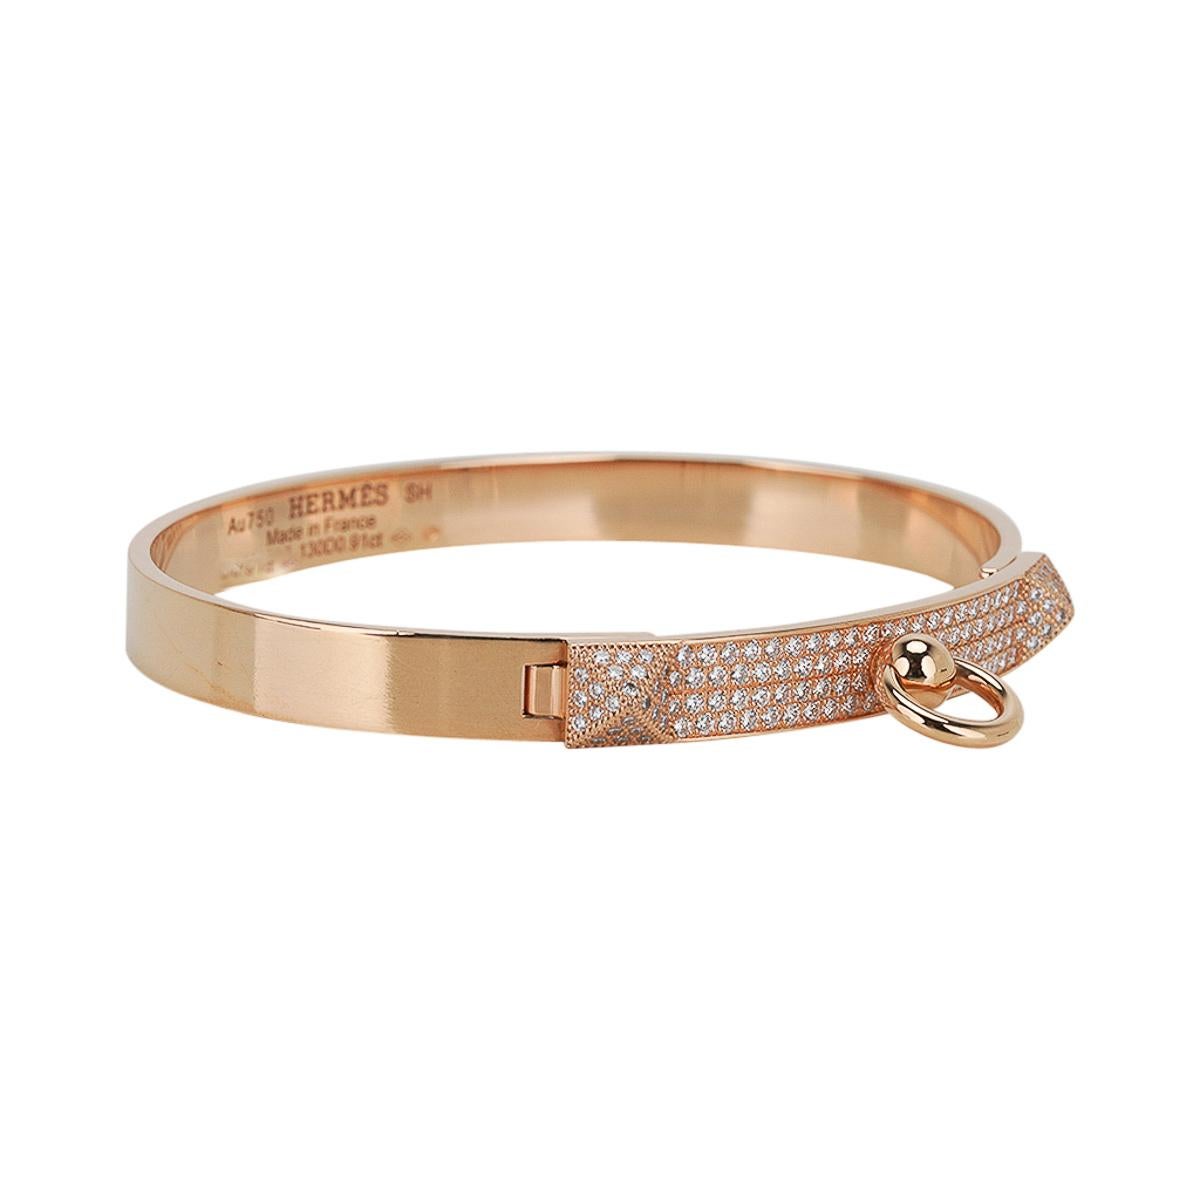 Mightychic offers an Hermes Diamond Collier de Chien bracelet featured in 18k Yellow Gold.
Set with 130 Diamonds.
Total carat weight is 0.91 ct.
Chic and instantly recognizable.
Bracelet has signature stamps inside.
Comes with signature brown pouch